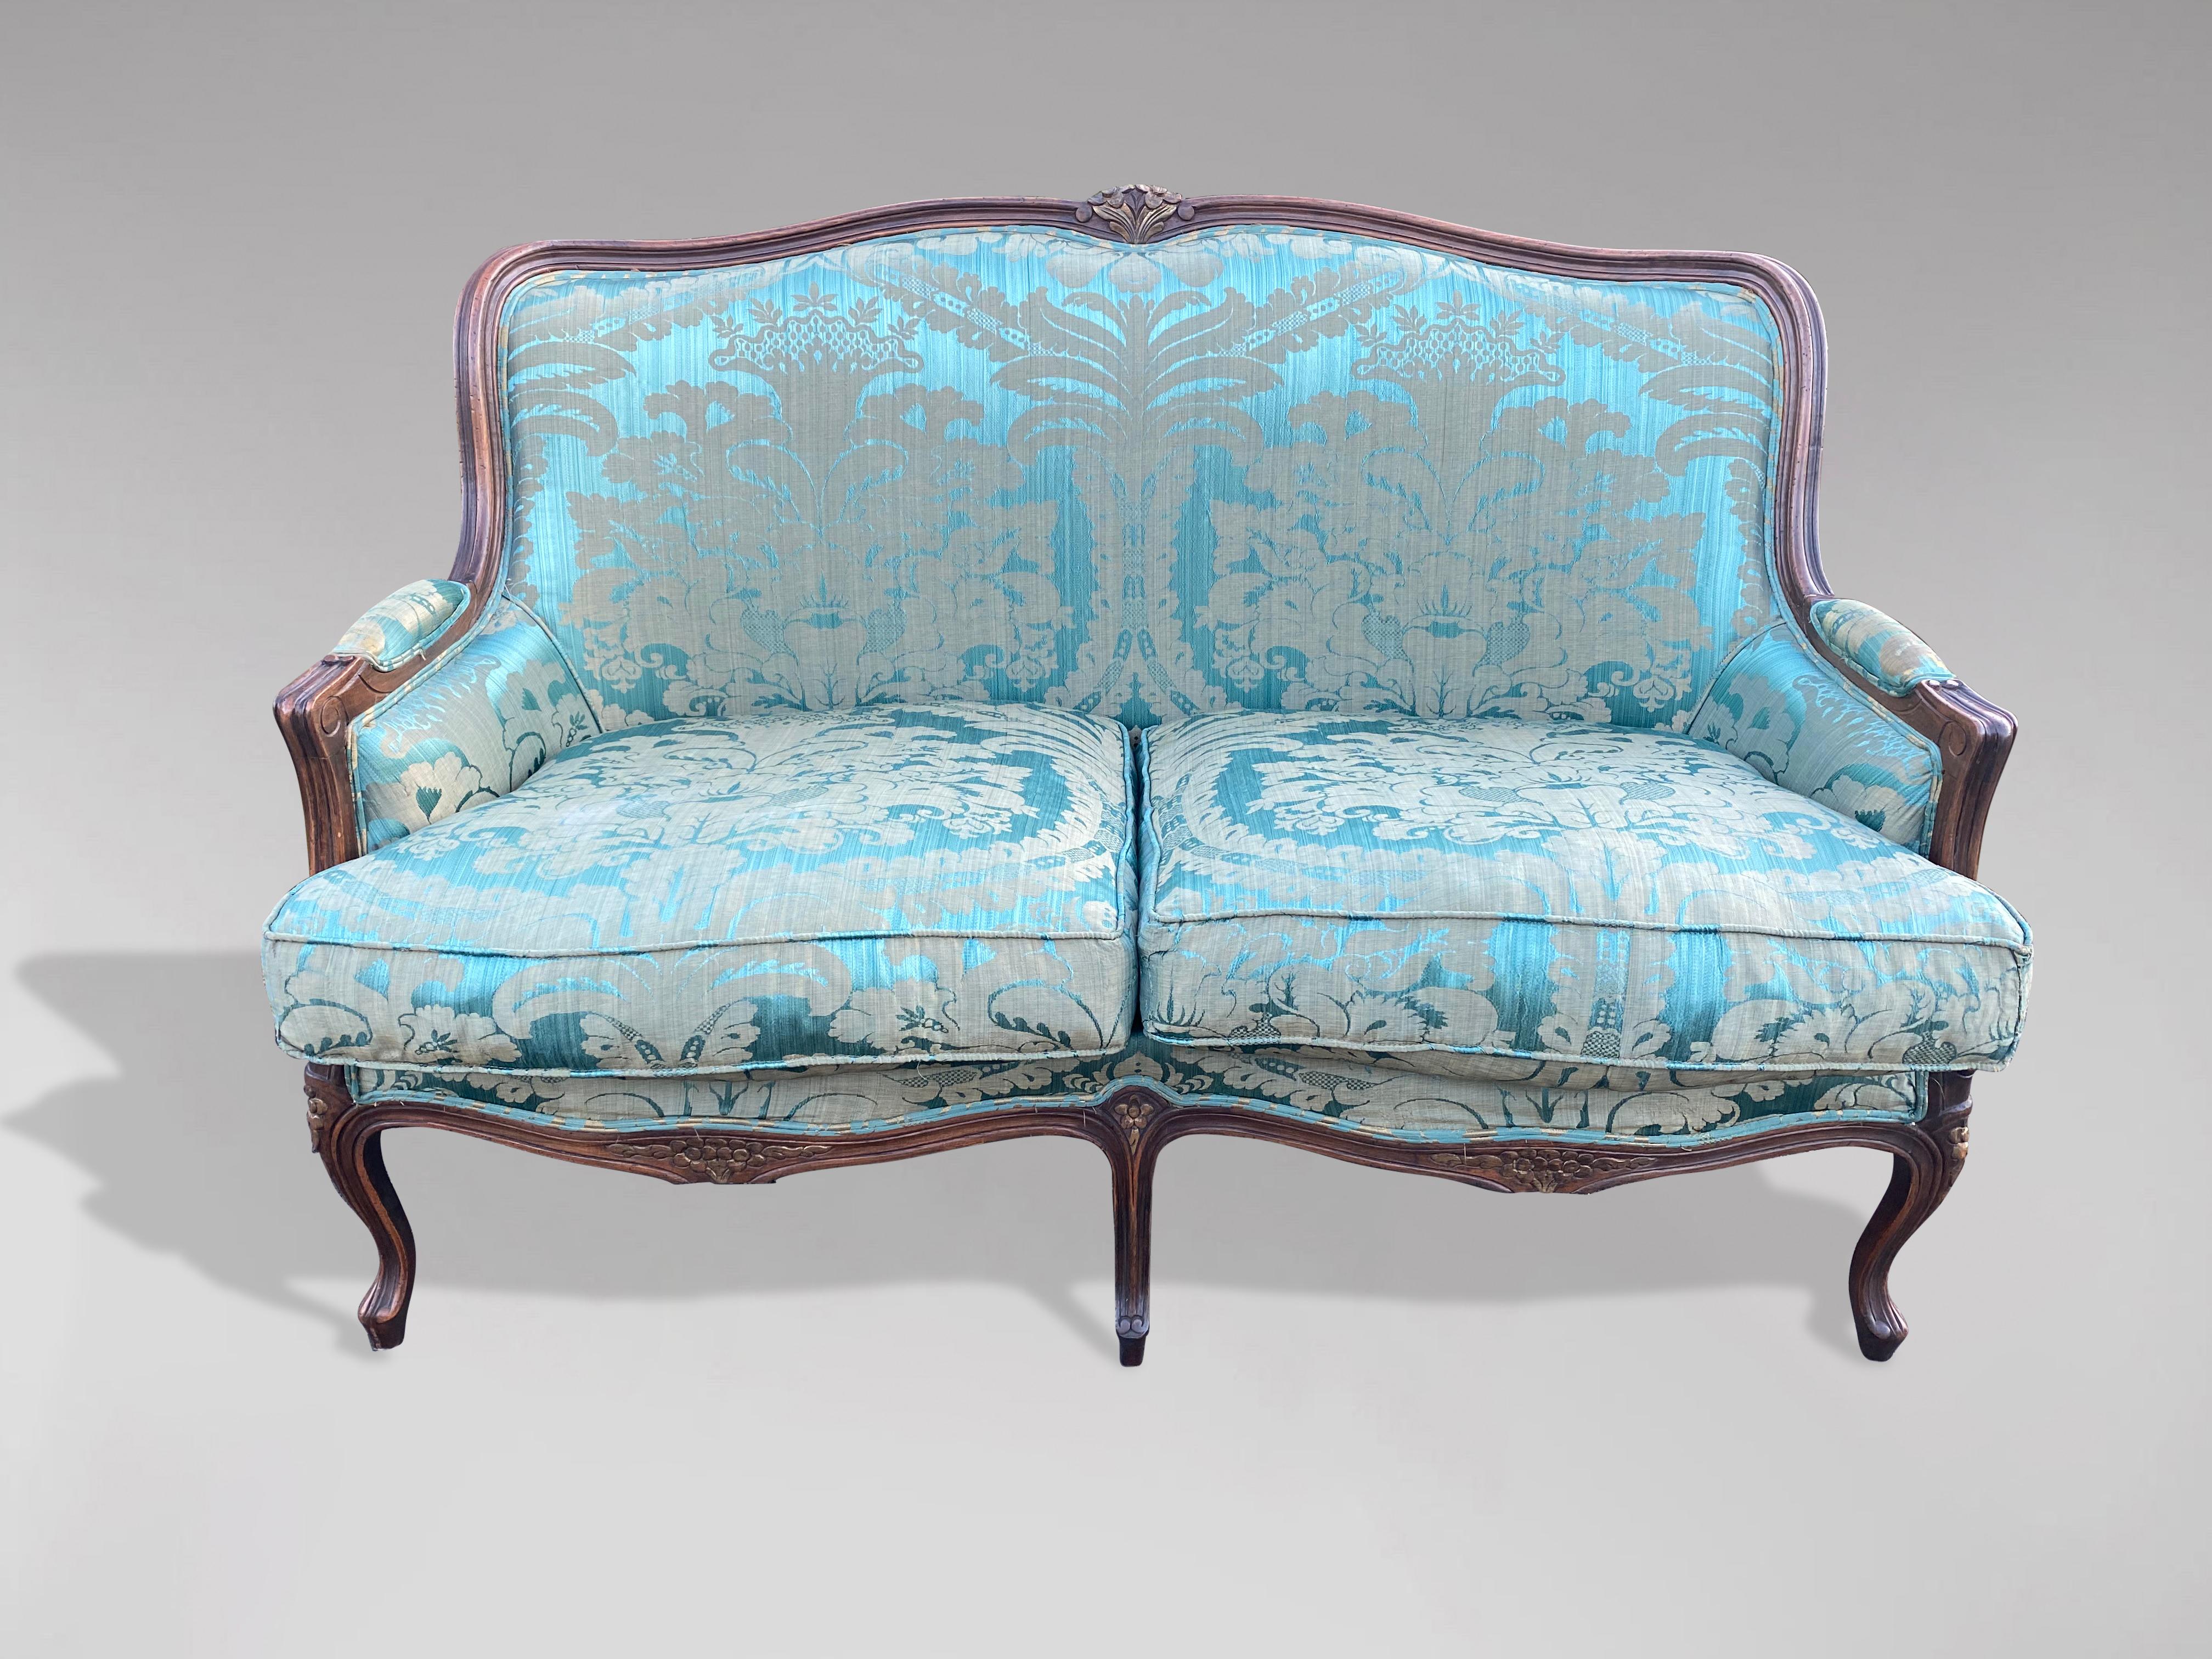 A late 19th Century French sofa in Louis XV Style, beech moulded frame carved with foliate detailing and curved back, standing on 5 elegant cabriole legs, upholstered in turquoise silk with two feather filled loose seat shaped cushions. The seat is